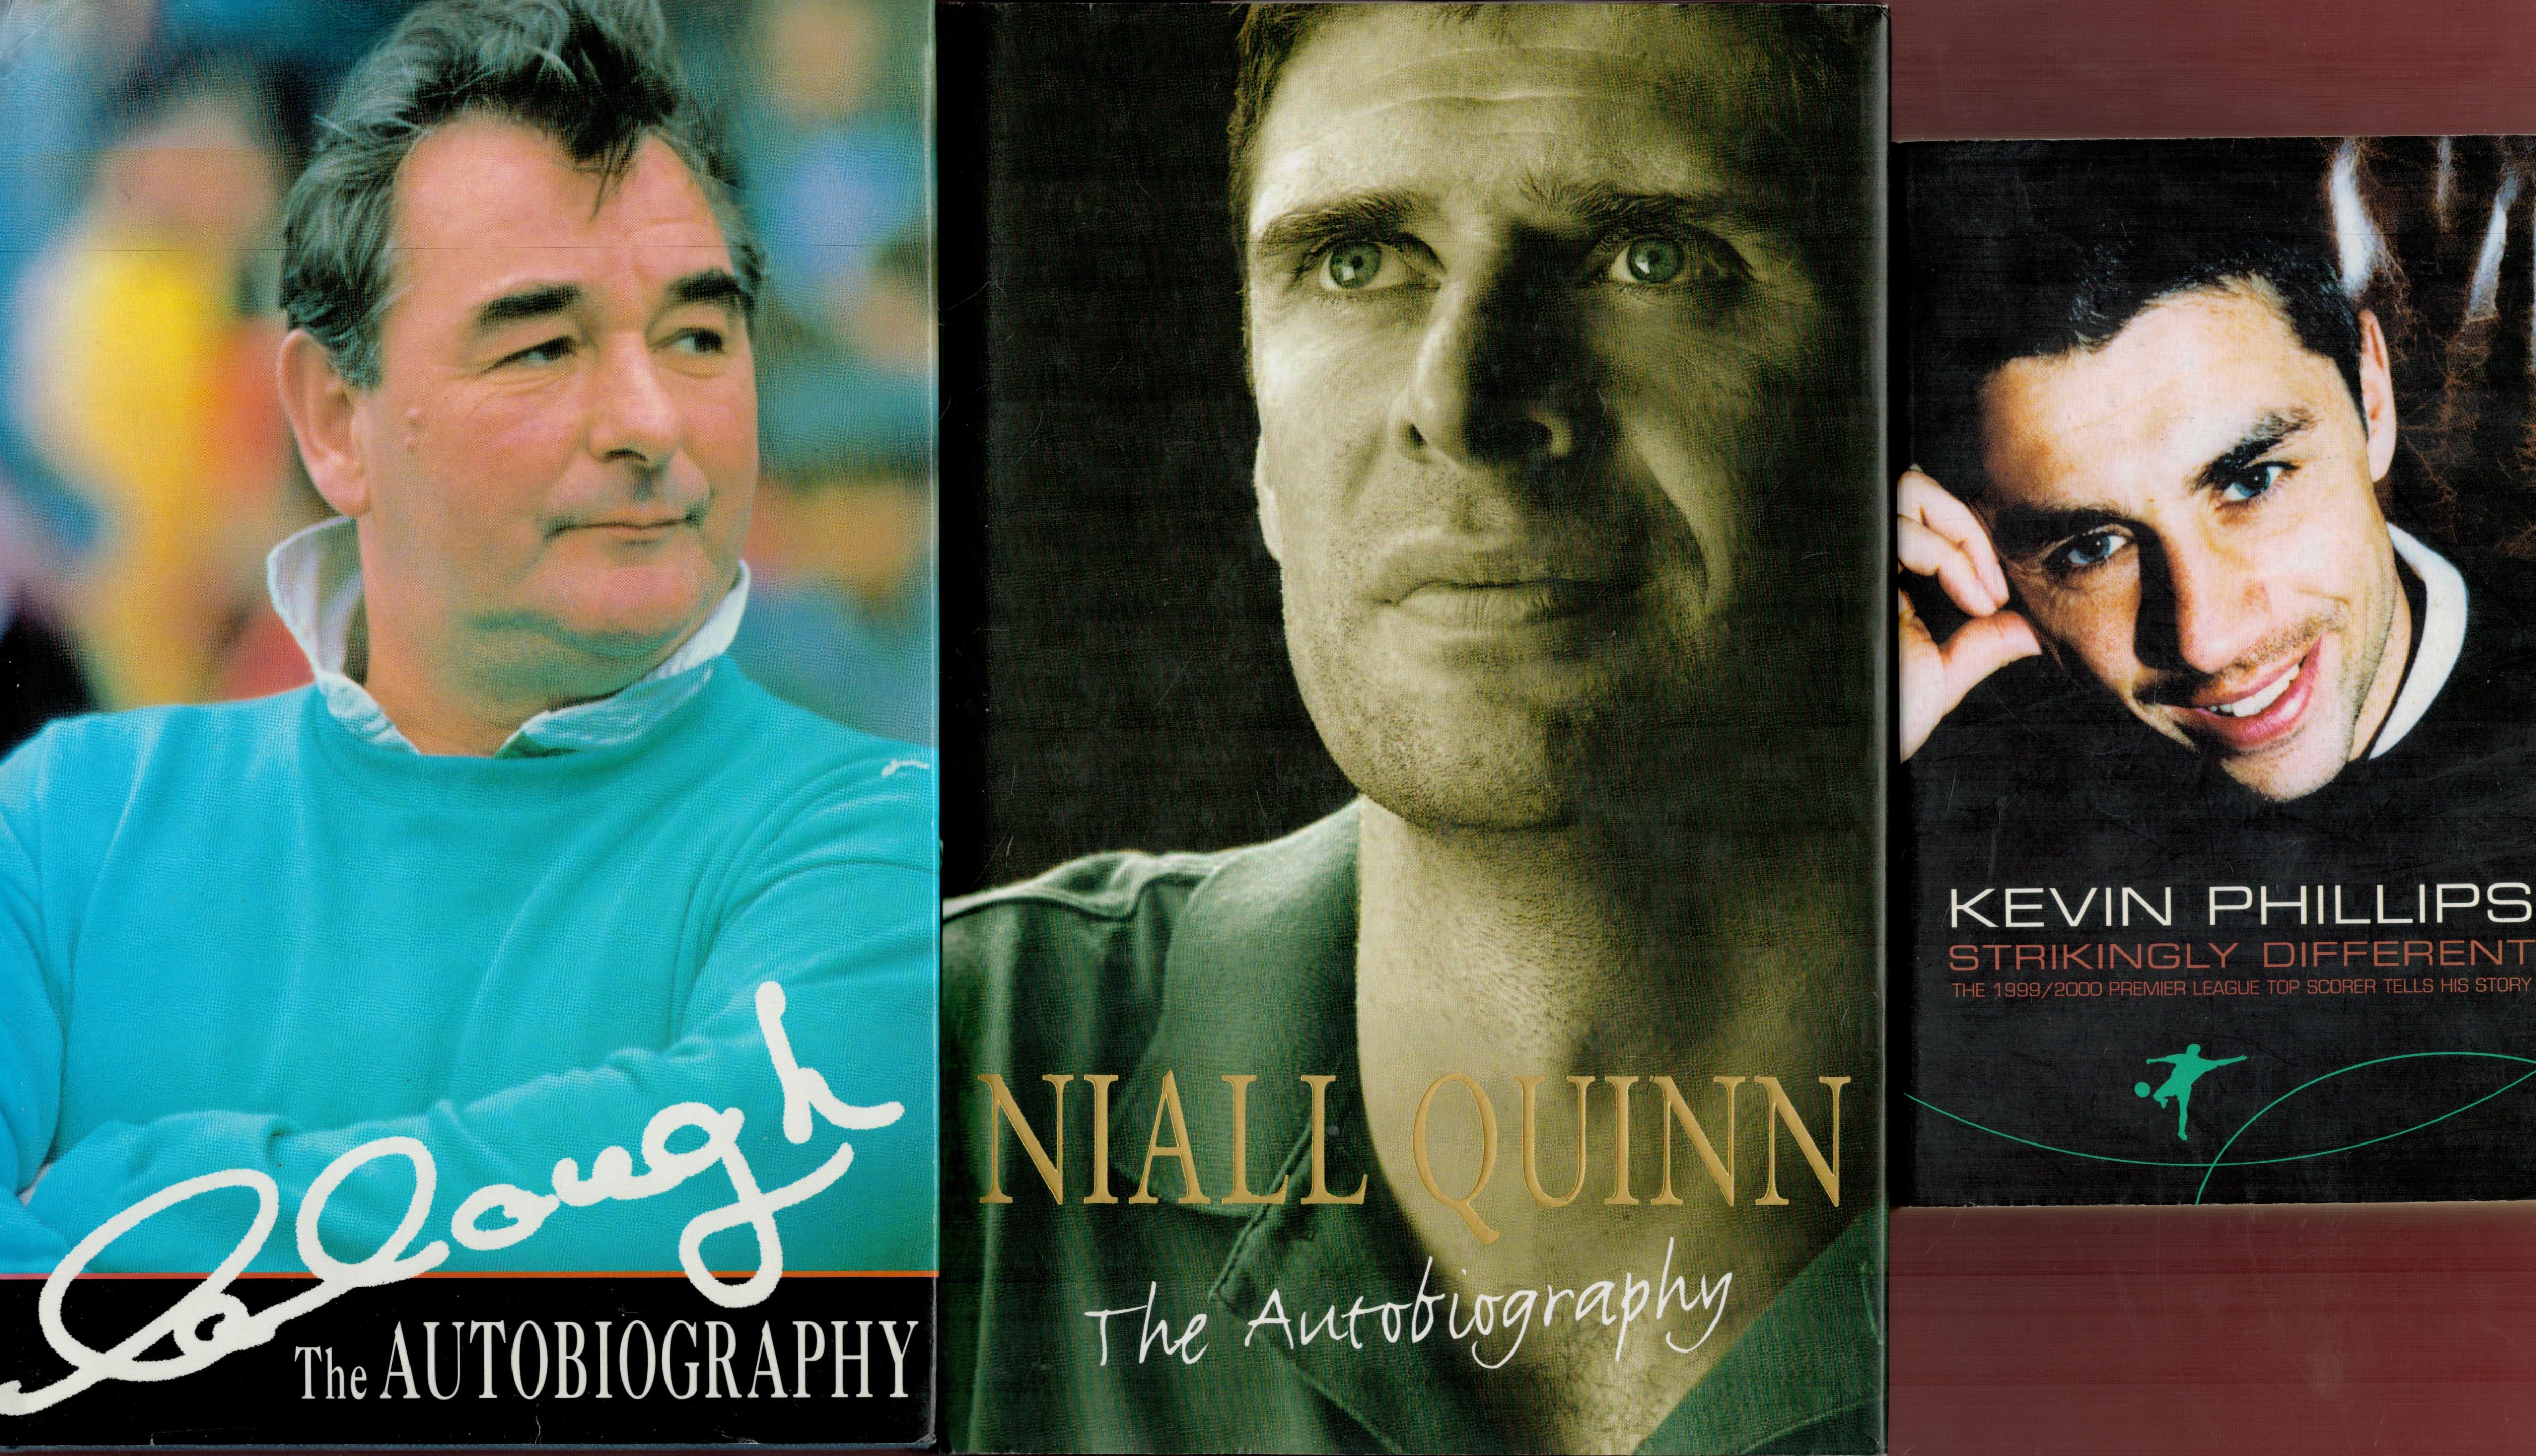 Collection of 3 Signed Football Related Books. Brian Clough Signed inside his Autobiography. Niall